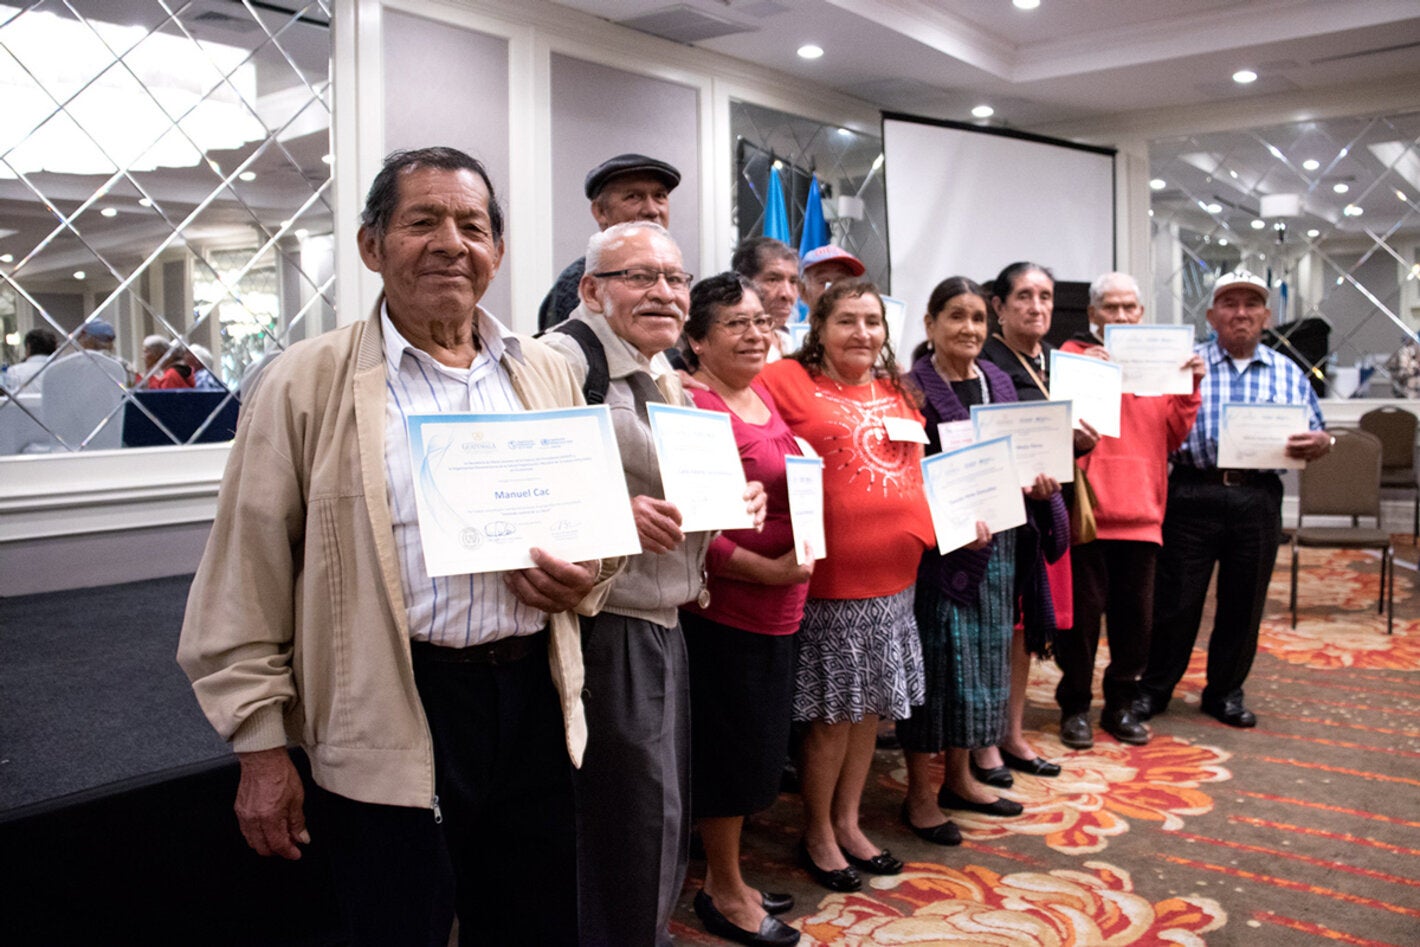 Don Manuel and other senior citizens